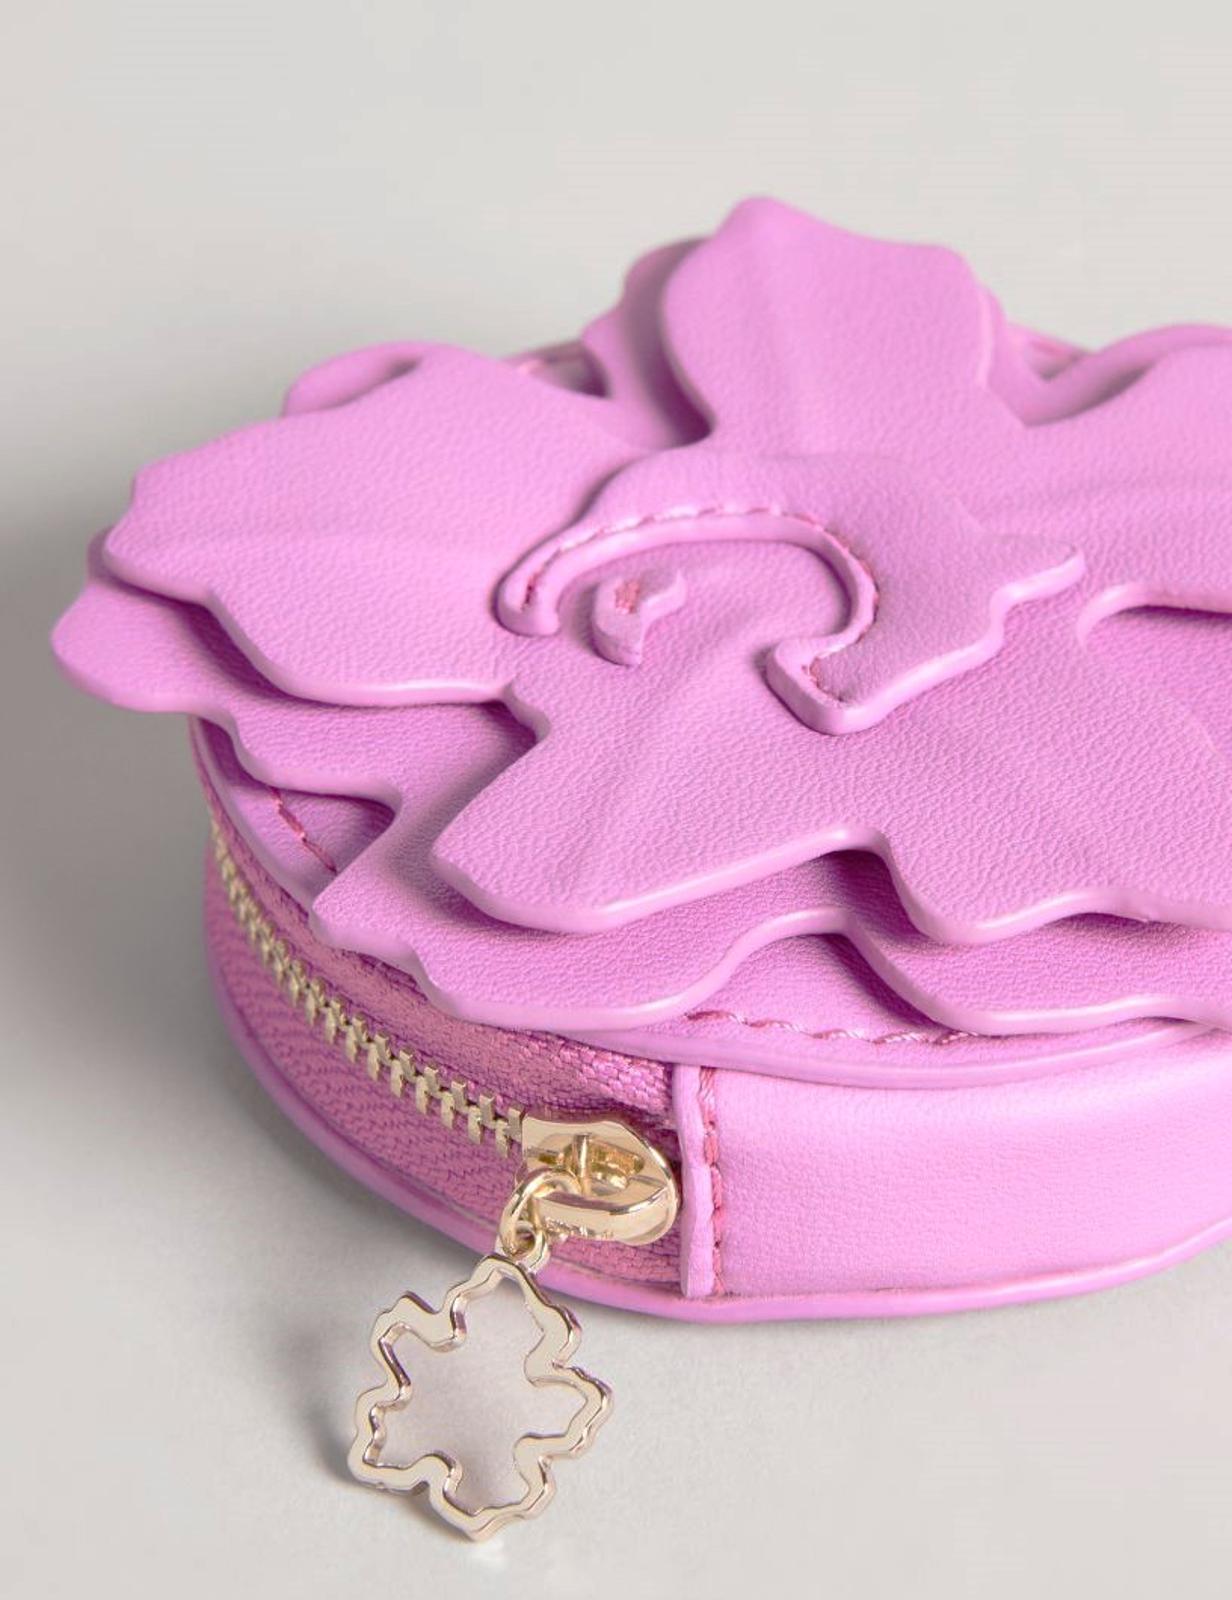 TED BAKER Florest Ladies Pink Faux Leather Floral Magnolia Coin Purse BNWT